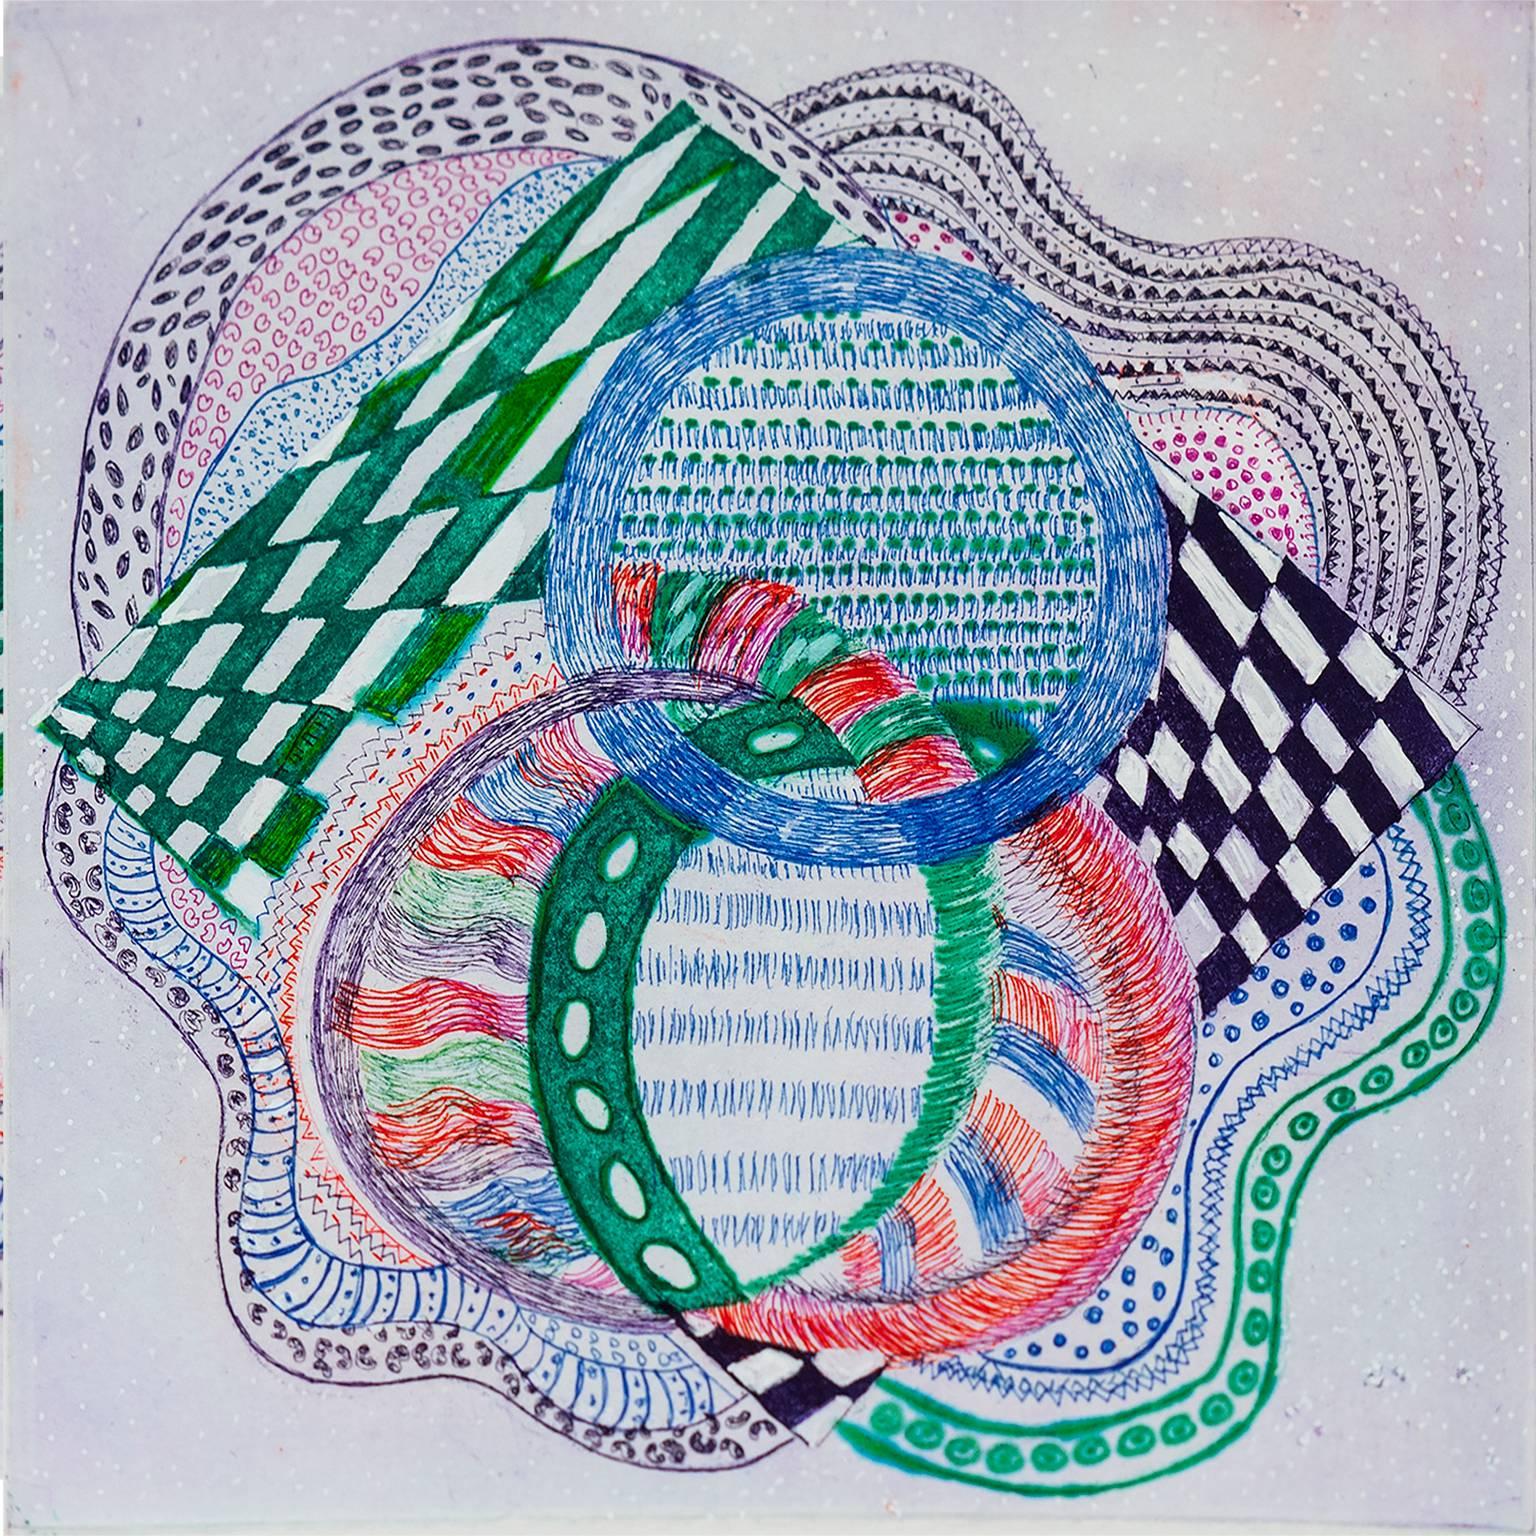 Dee Shapiro Abstract Print - "On The Way Home", abstract pattern etching print, red, blue, green, violet.